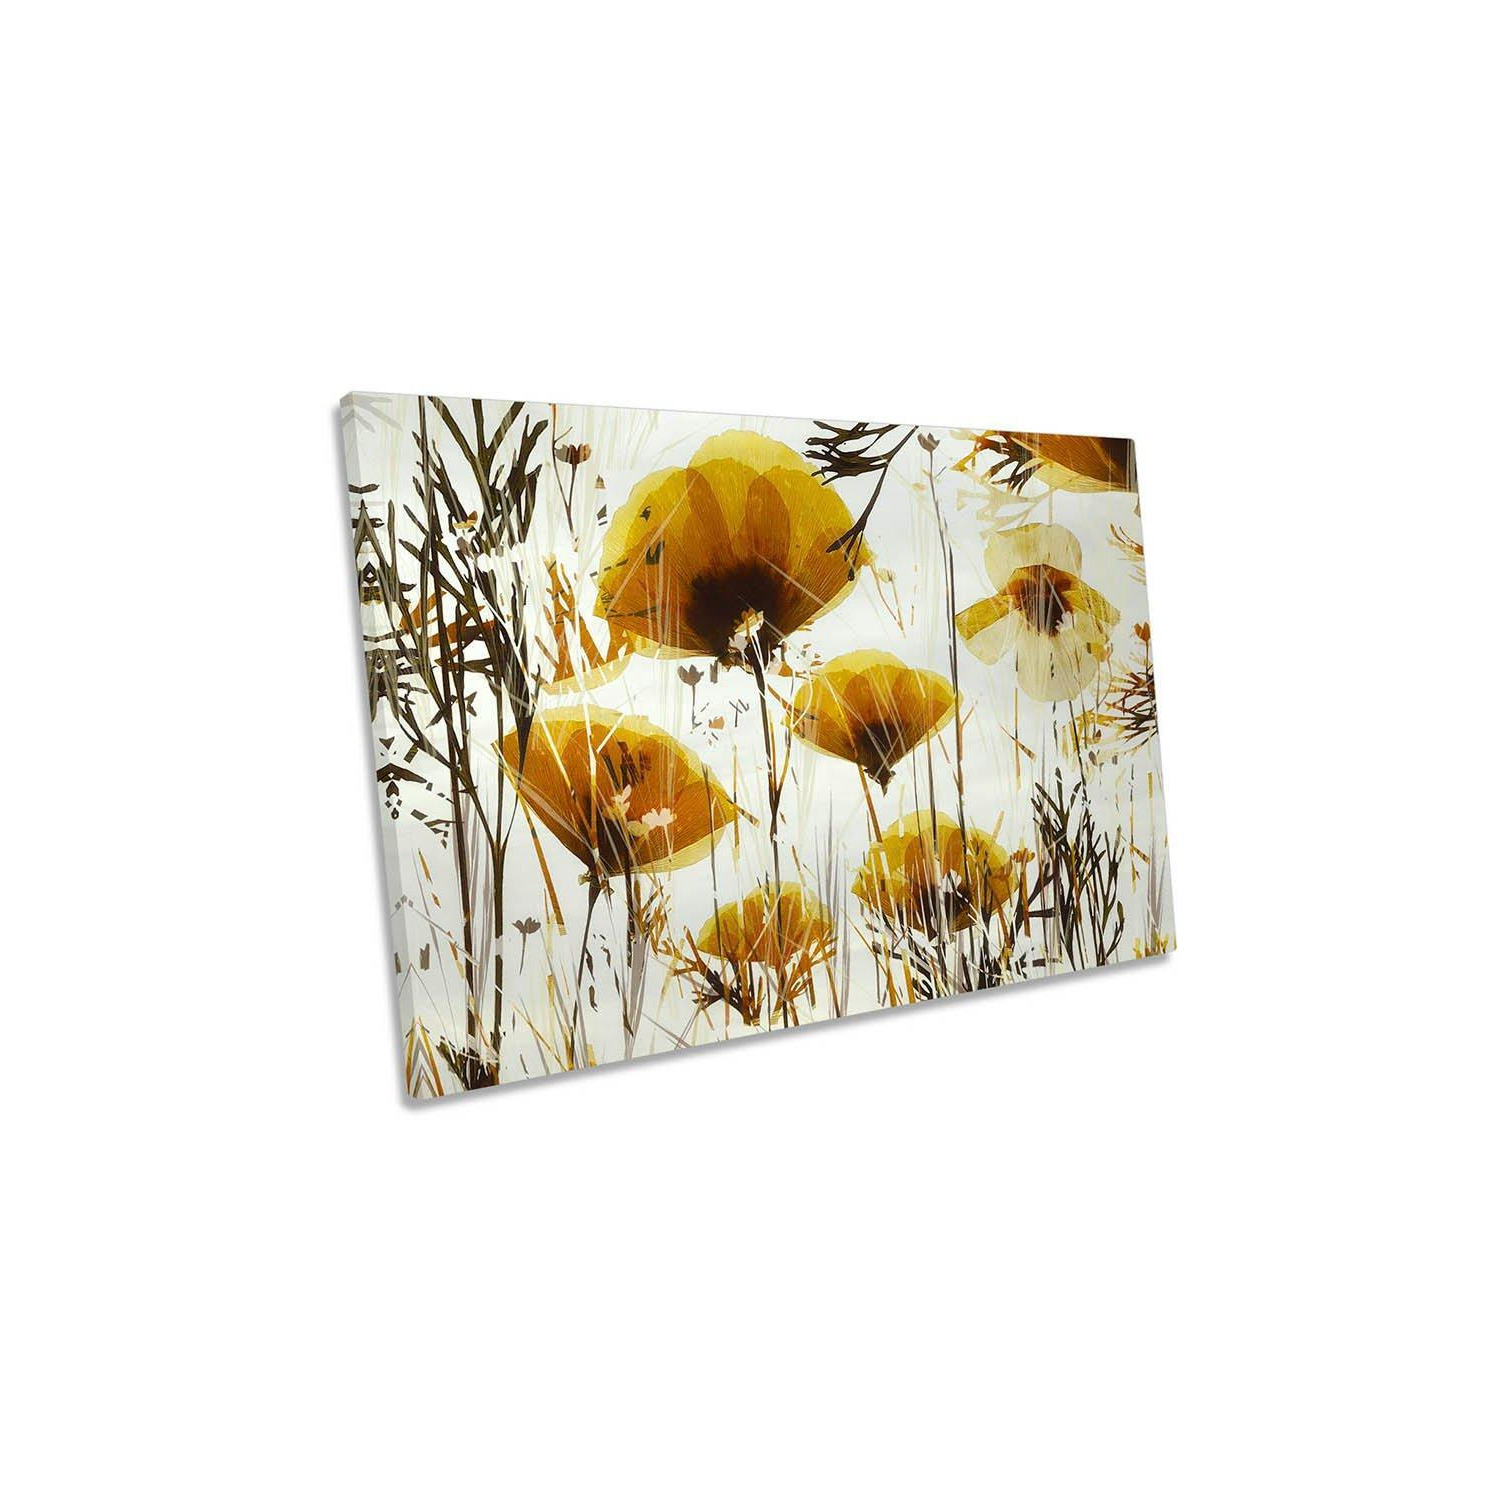 Promise Poppies Flower Floral Orange Canvas Wall Art Picture Print - image 1